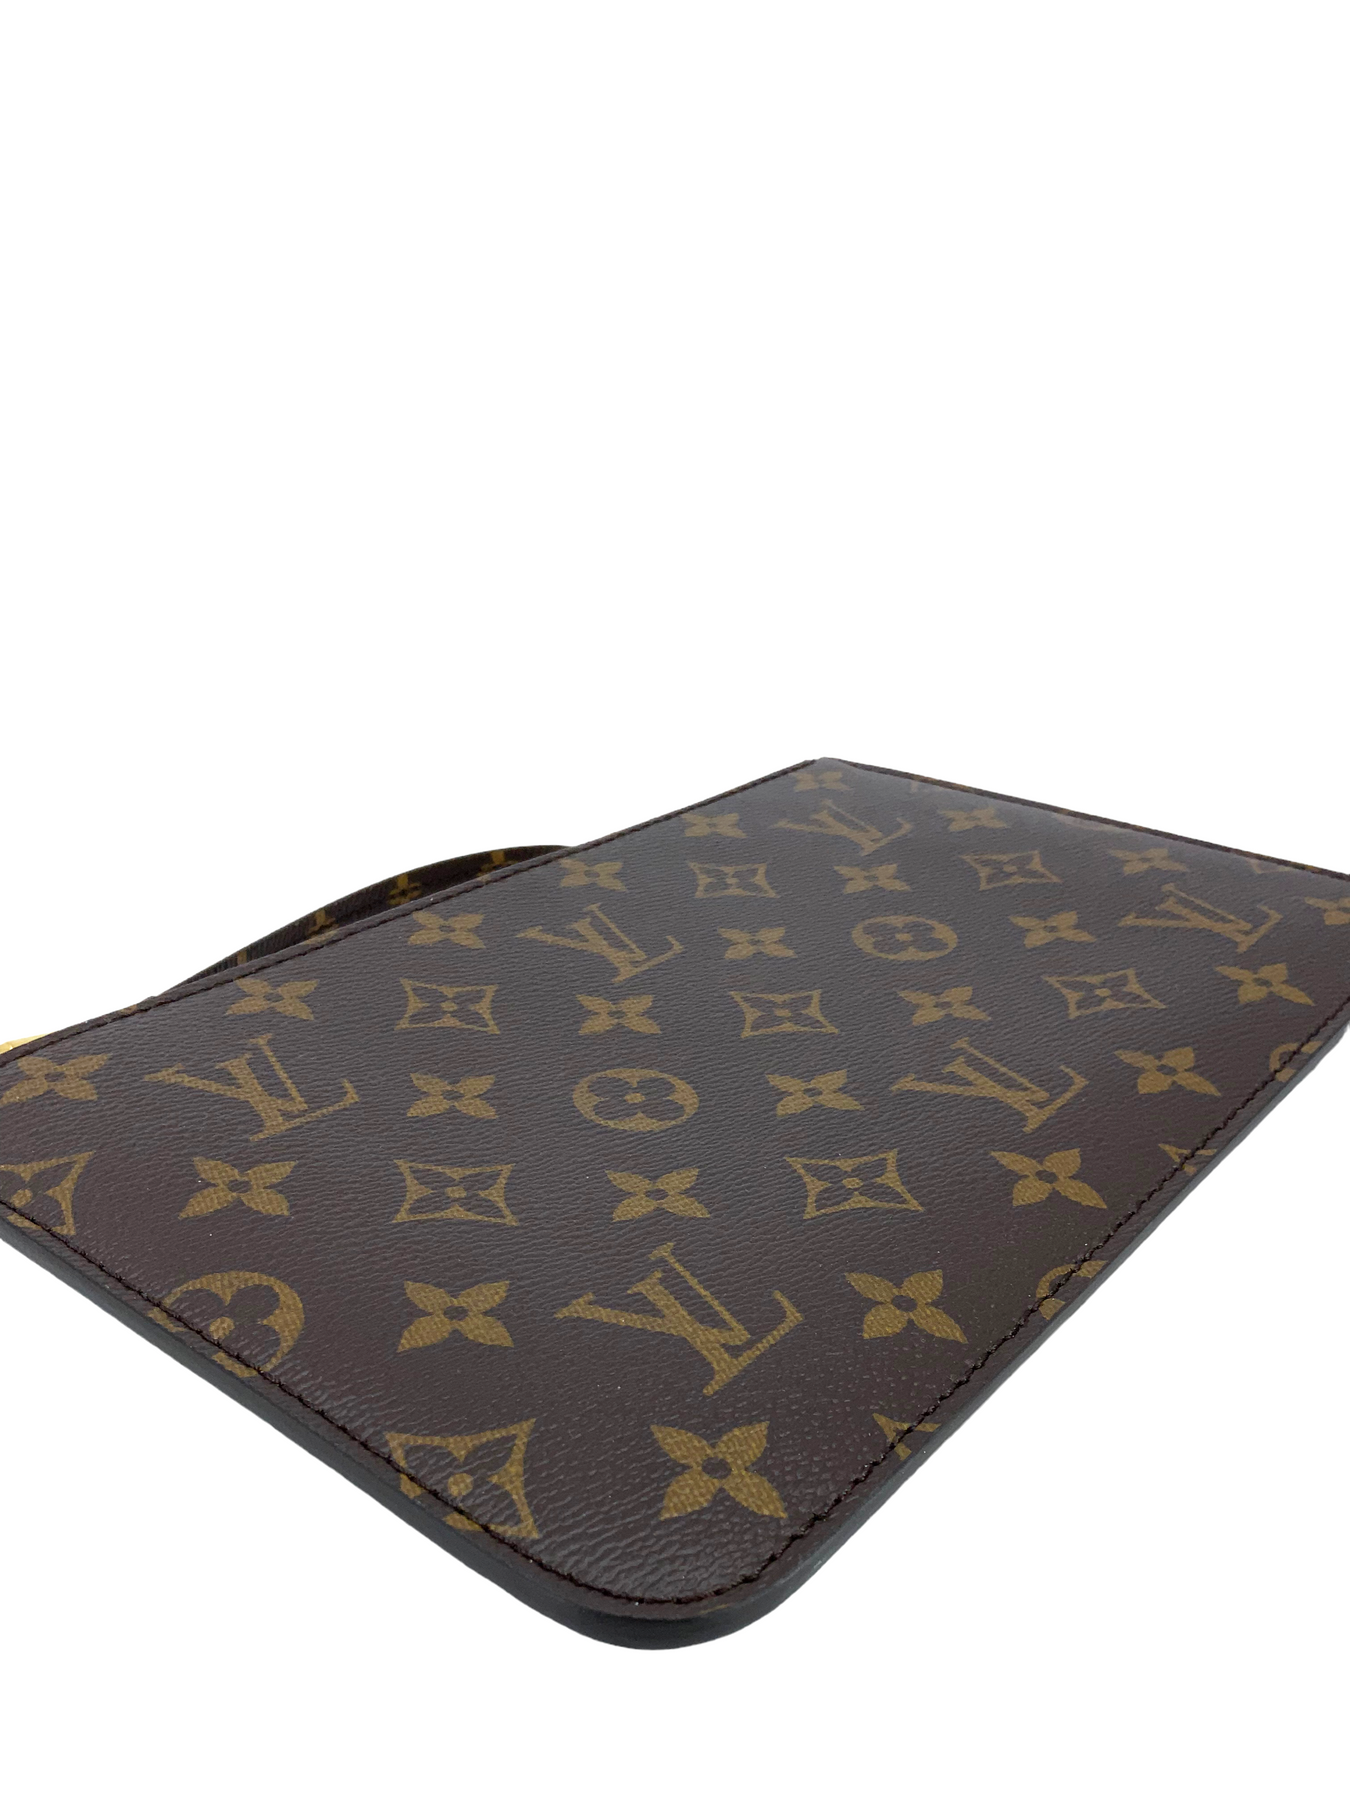 Louis Vuitton Monogram Teddy Neverfull MM Tote bag with Pouch 283lvs512